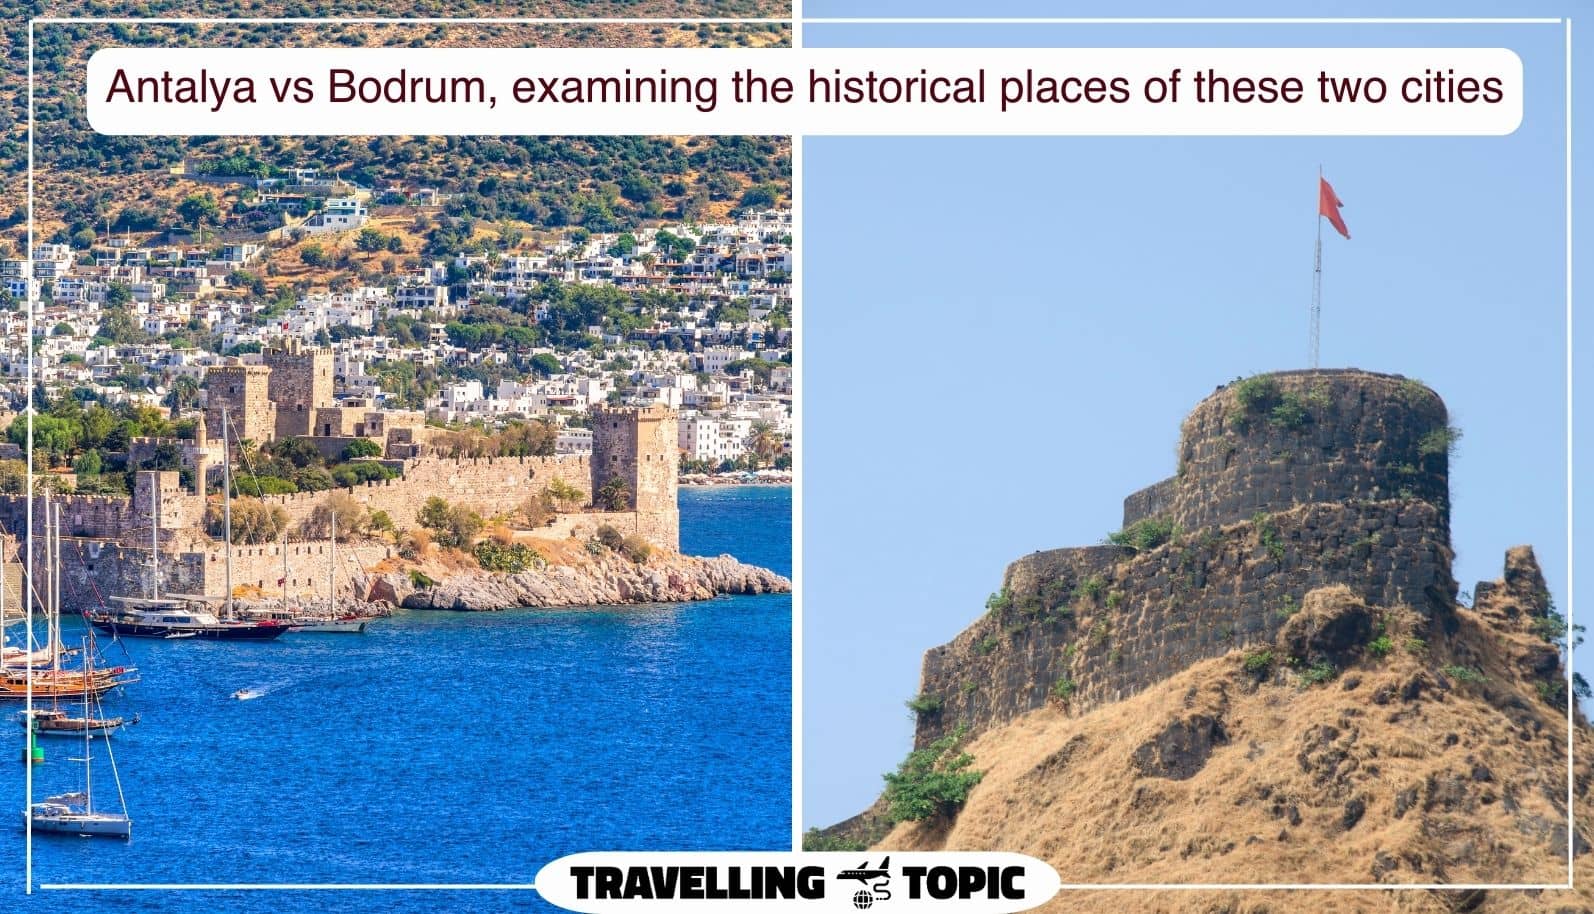 Antalya vs Bodrum, examining the historical places of these two cities